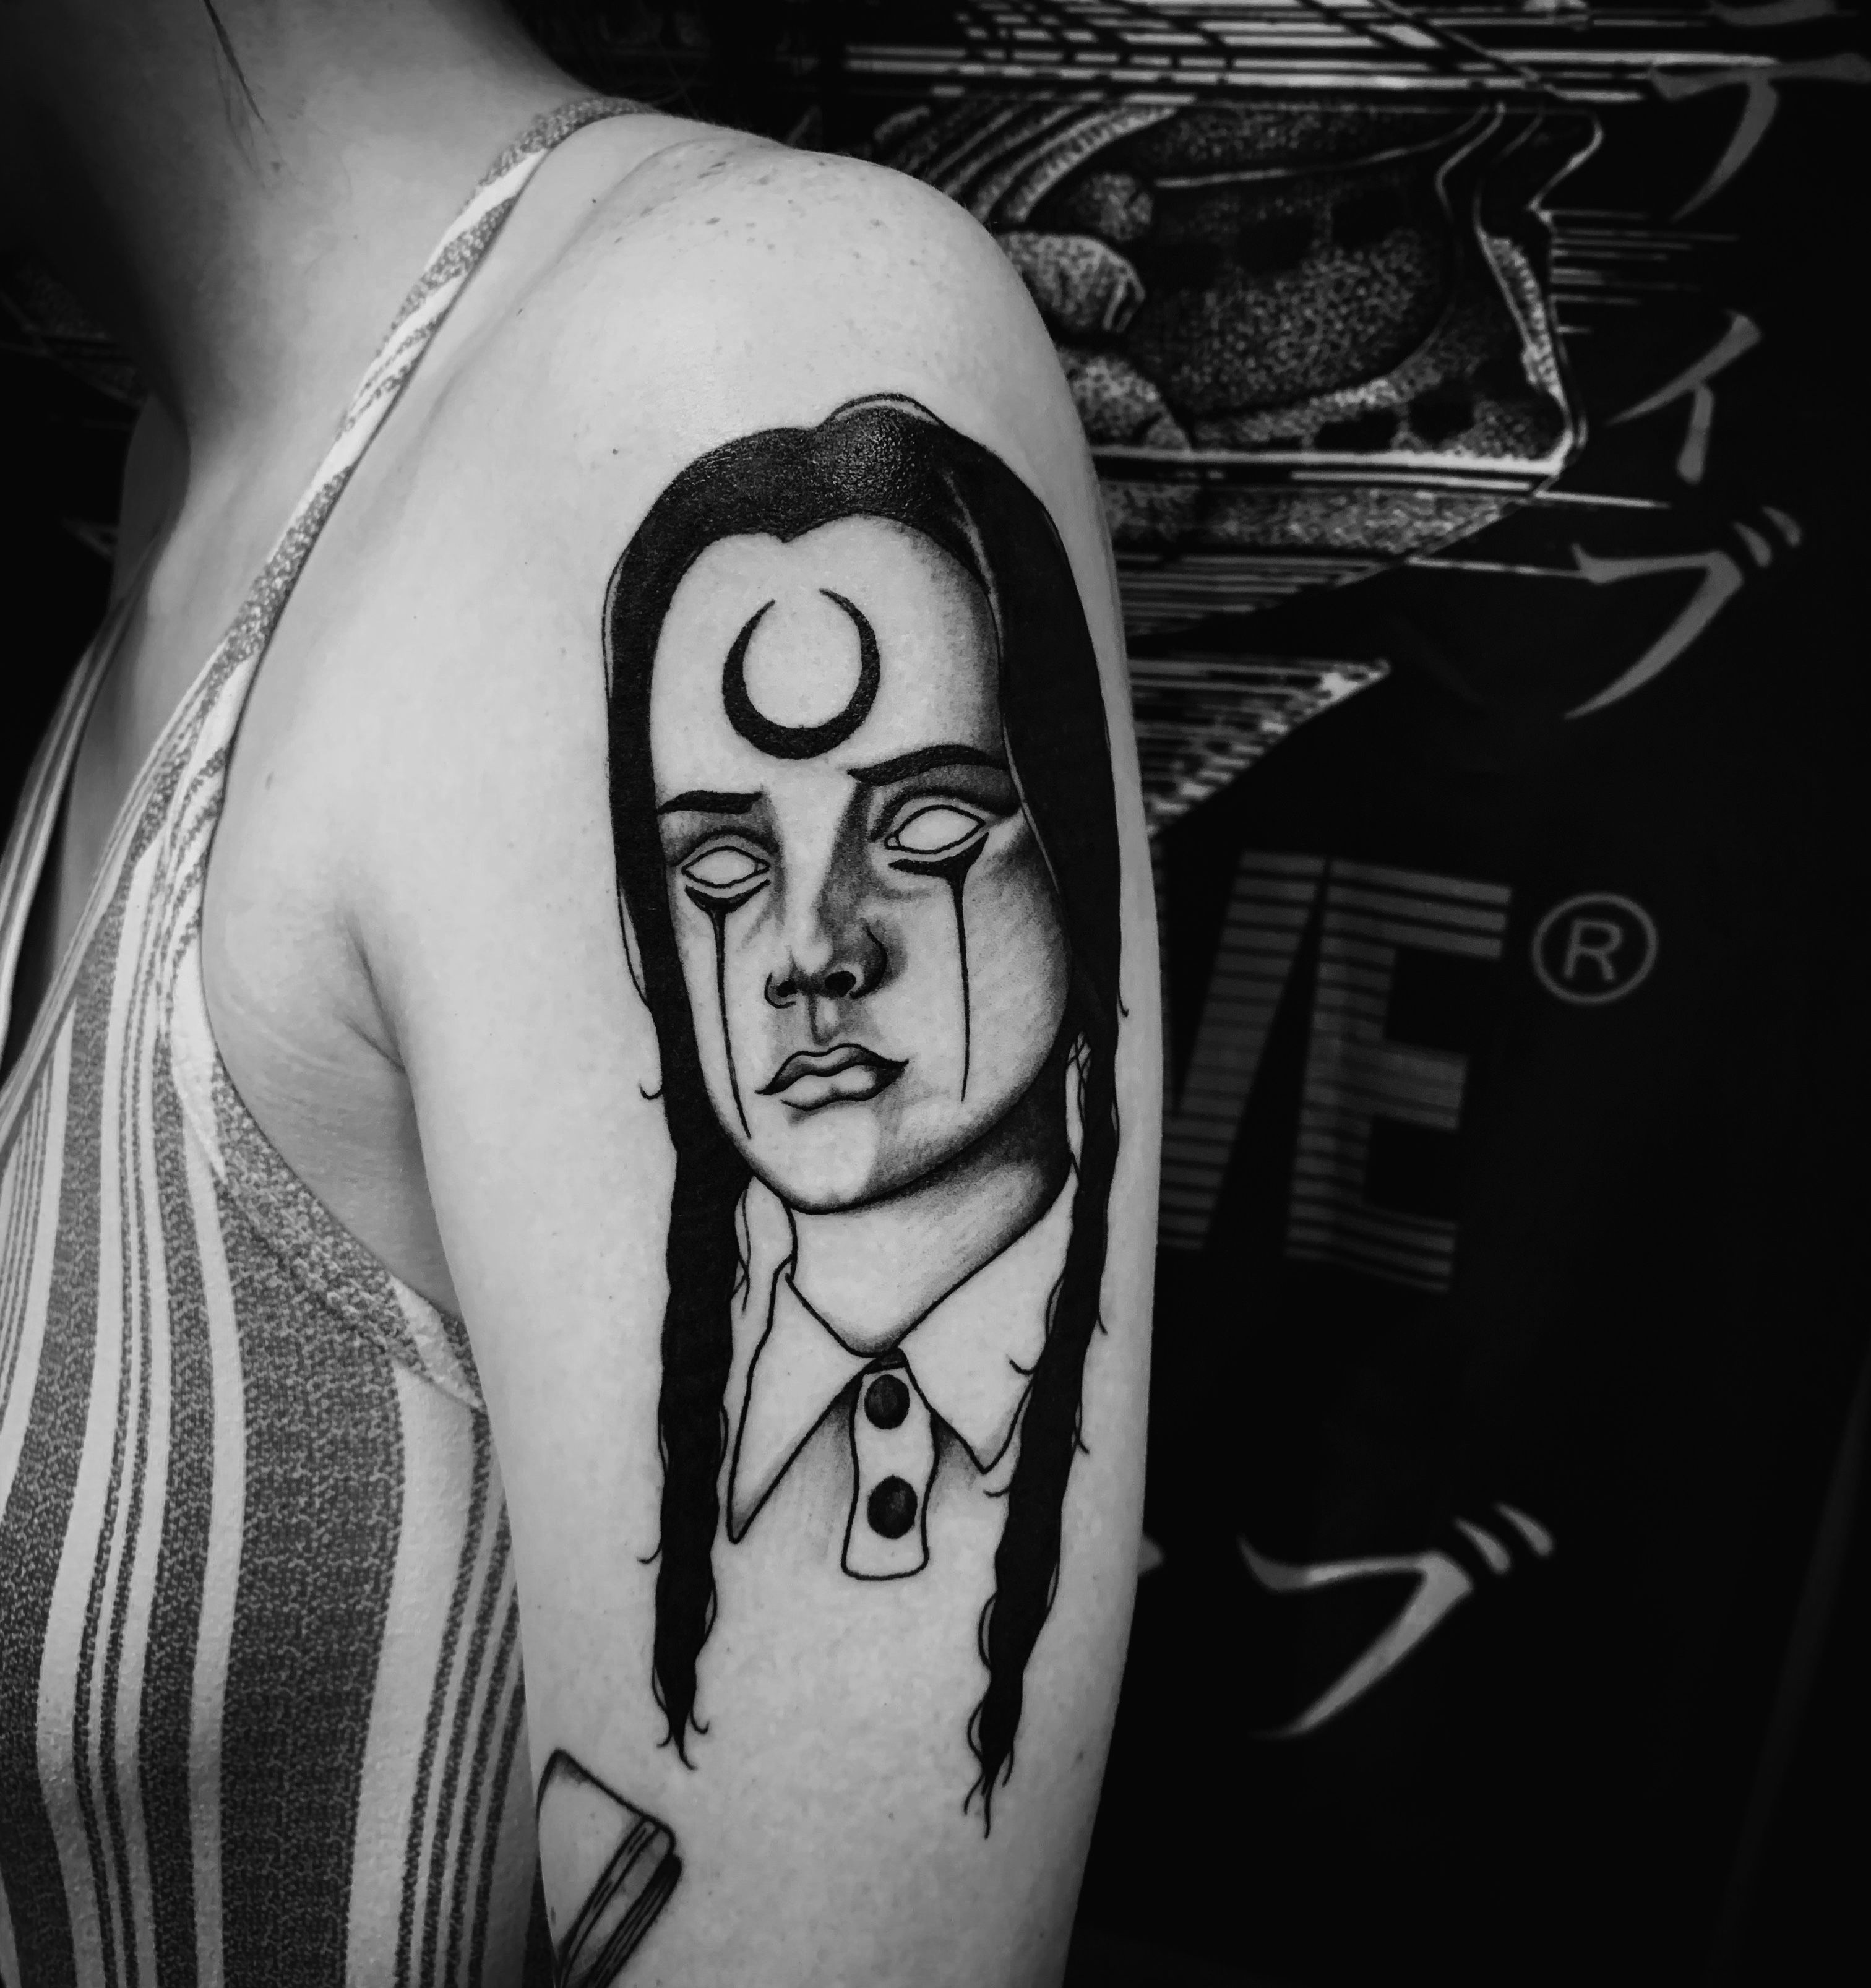 The Very Best Wedesday Addams Tattoos  Halloween tattoos Body art tattoos  Halloween tattoos sleeve